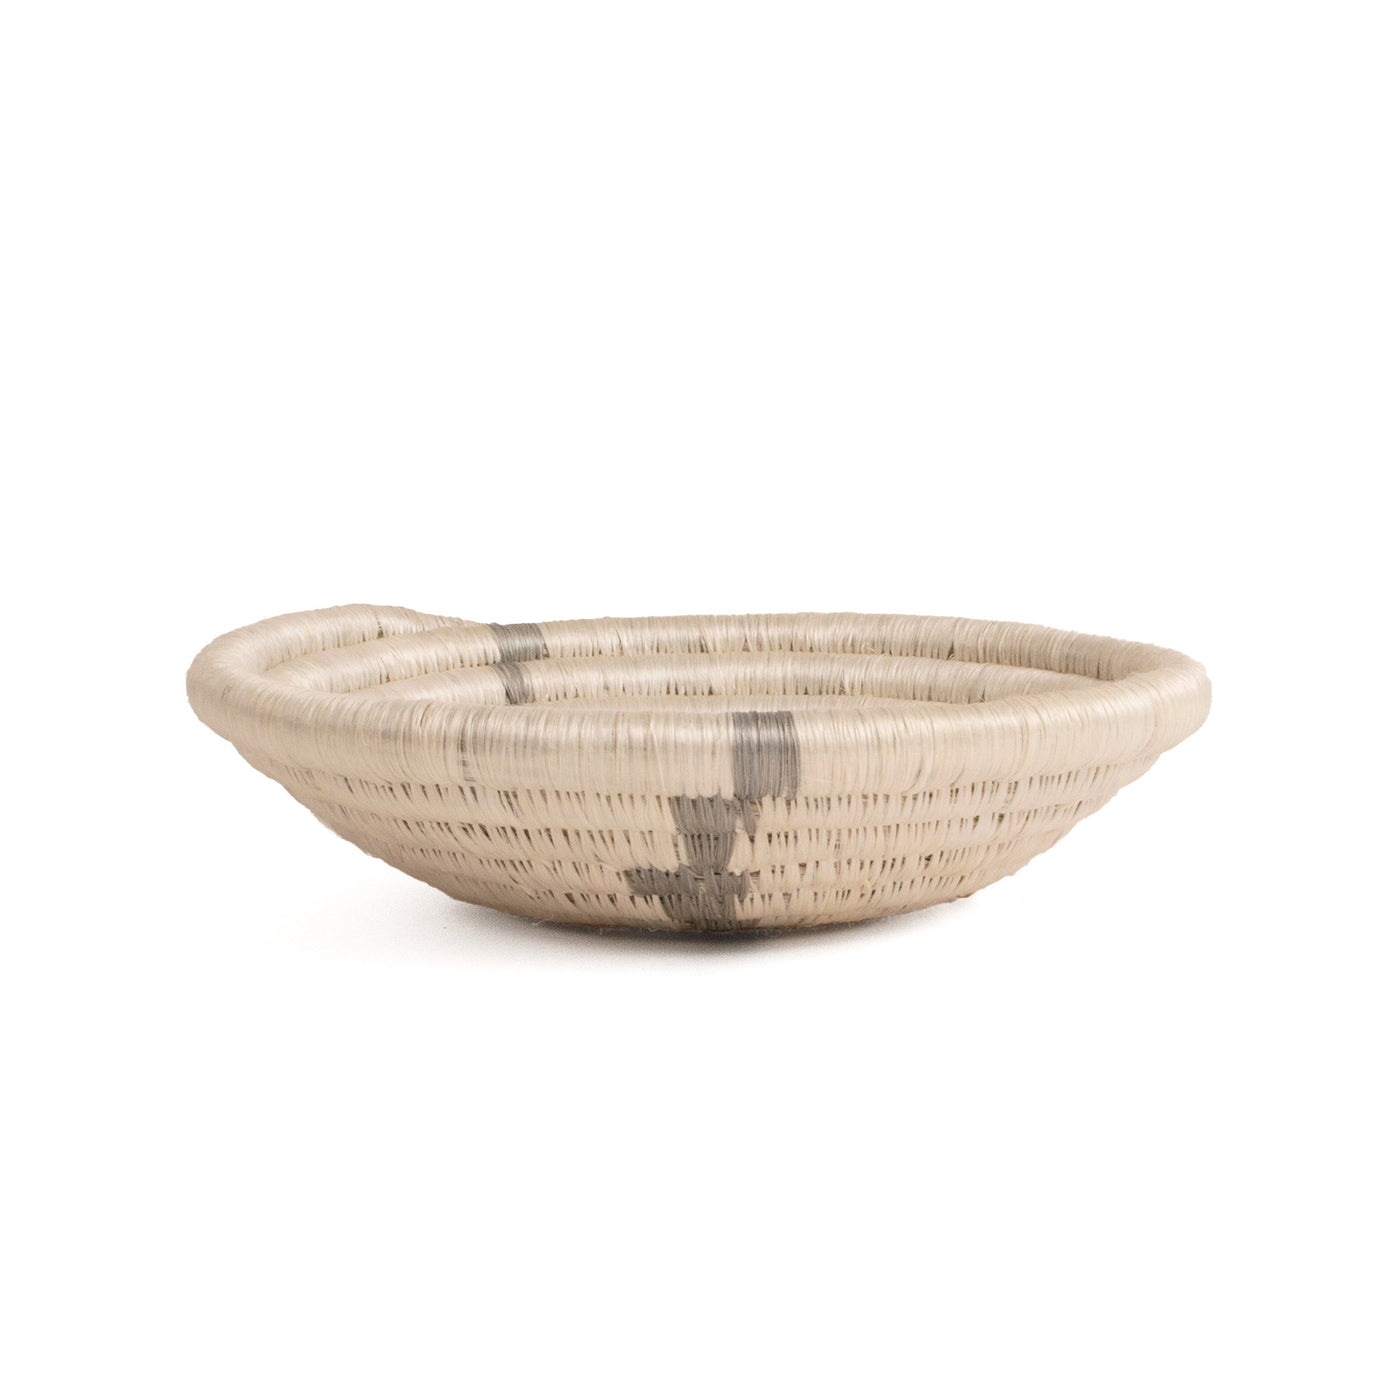 Stone Woven Bowl - 6" Composed